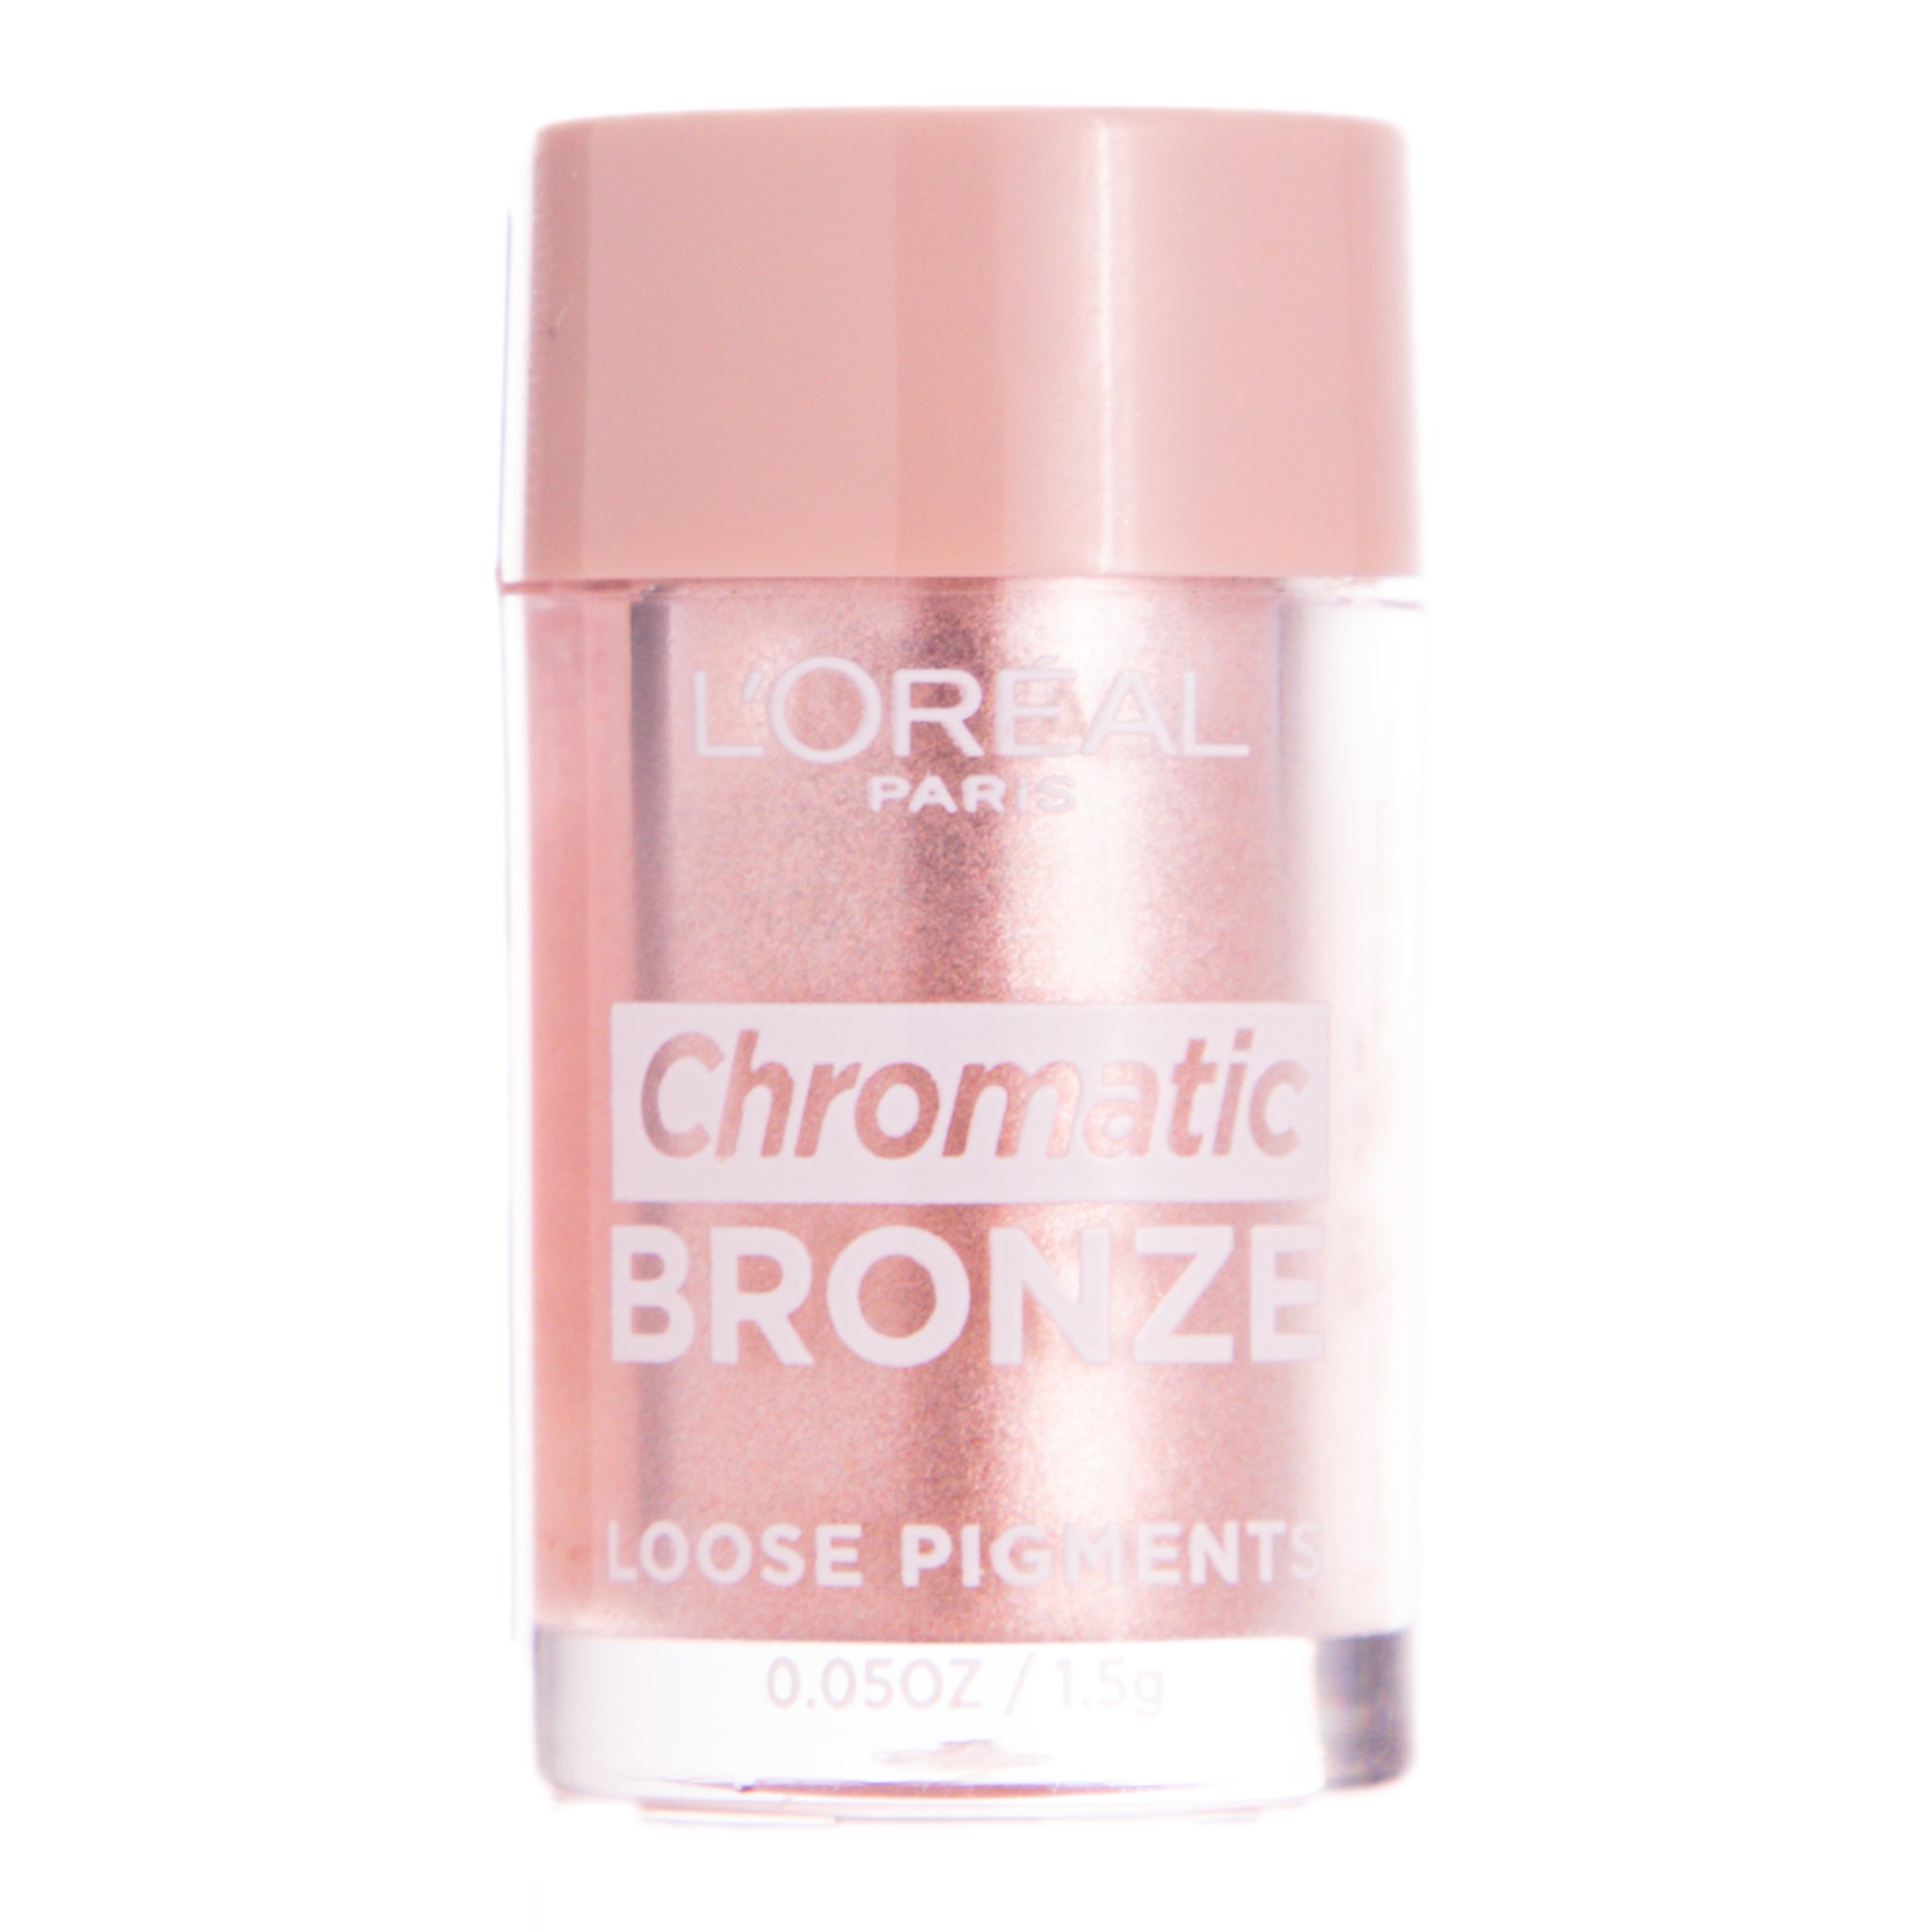 L'Oreal Chromatic Bronze Loose Pigment - 01 As If